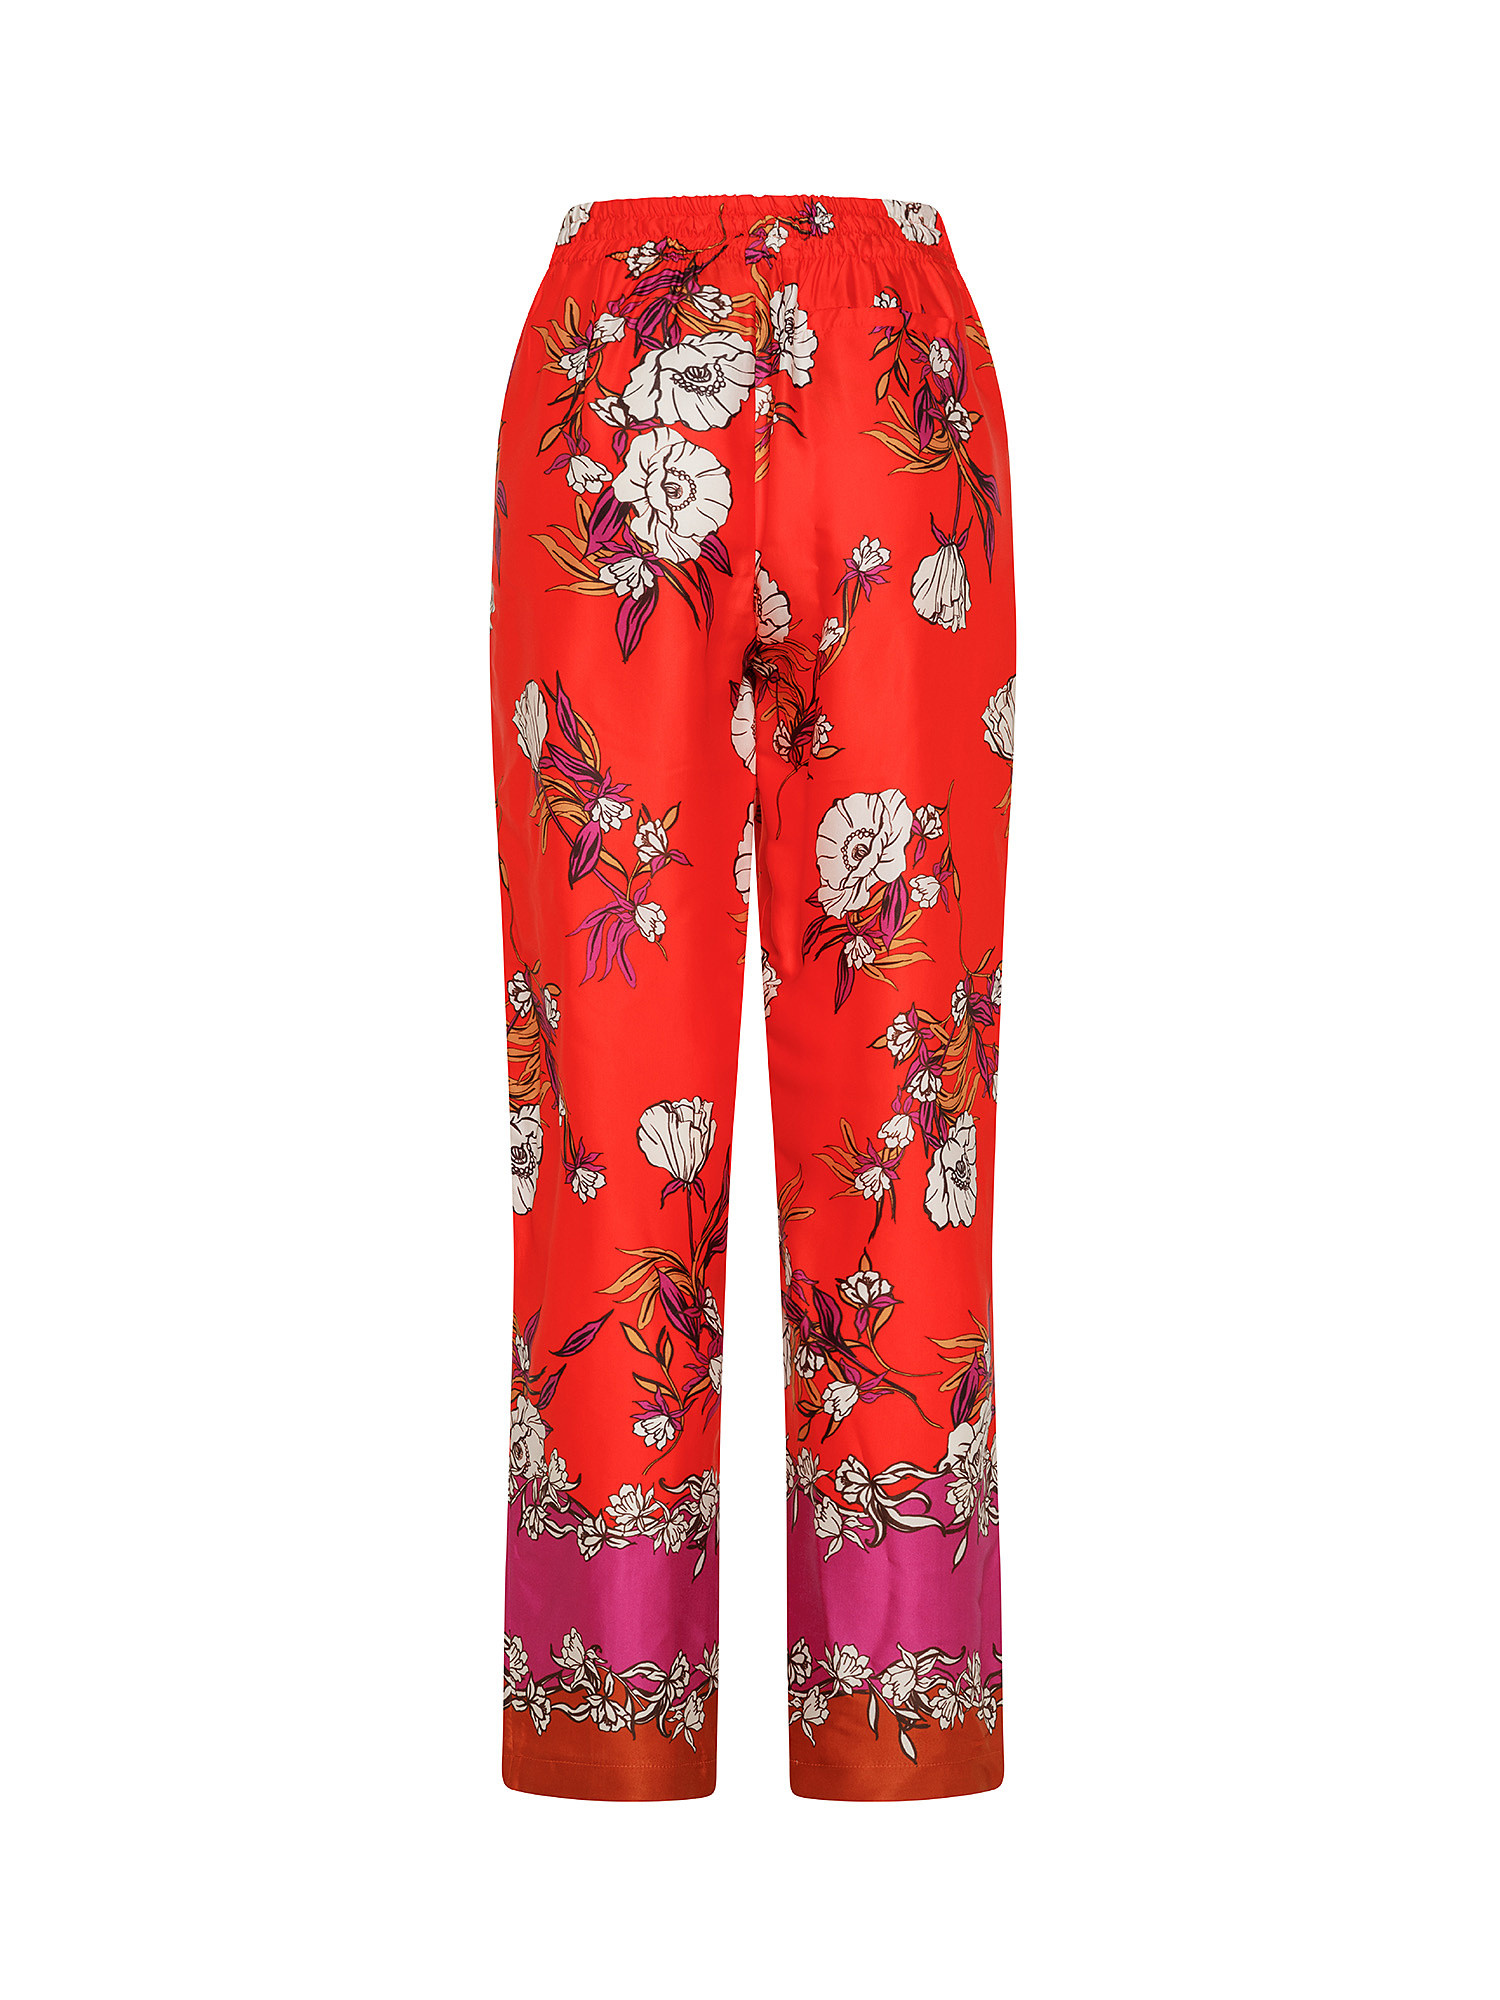 Pantalone con stampa, Rosso, large image number 1